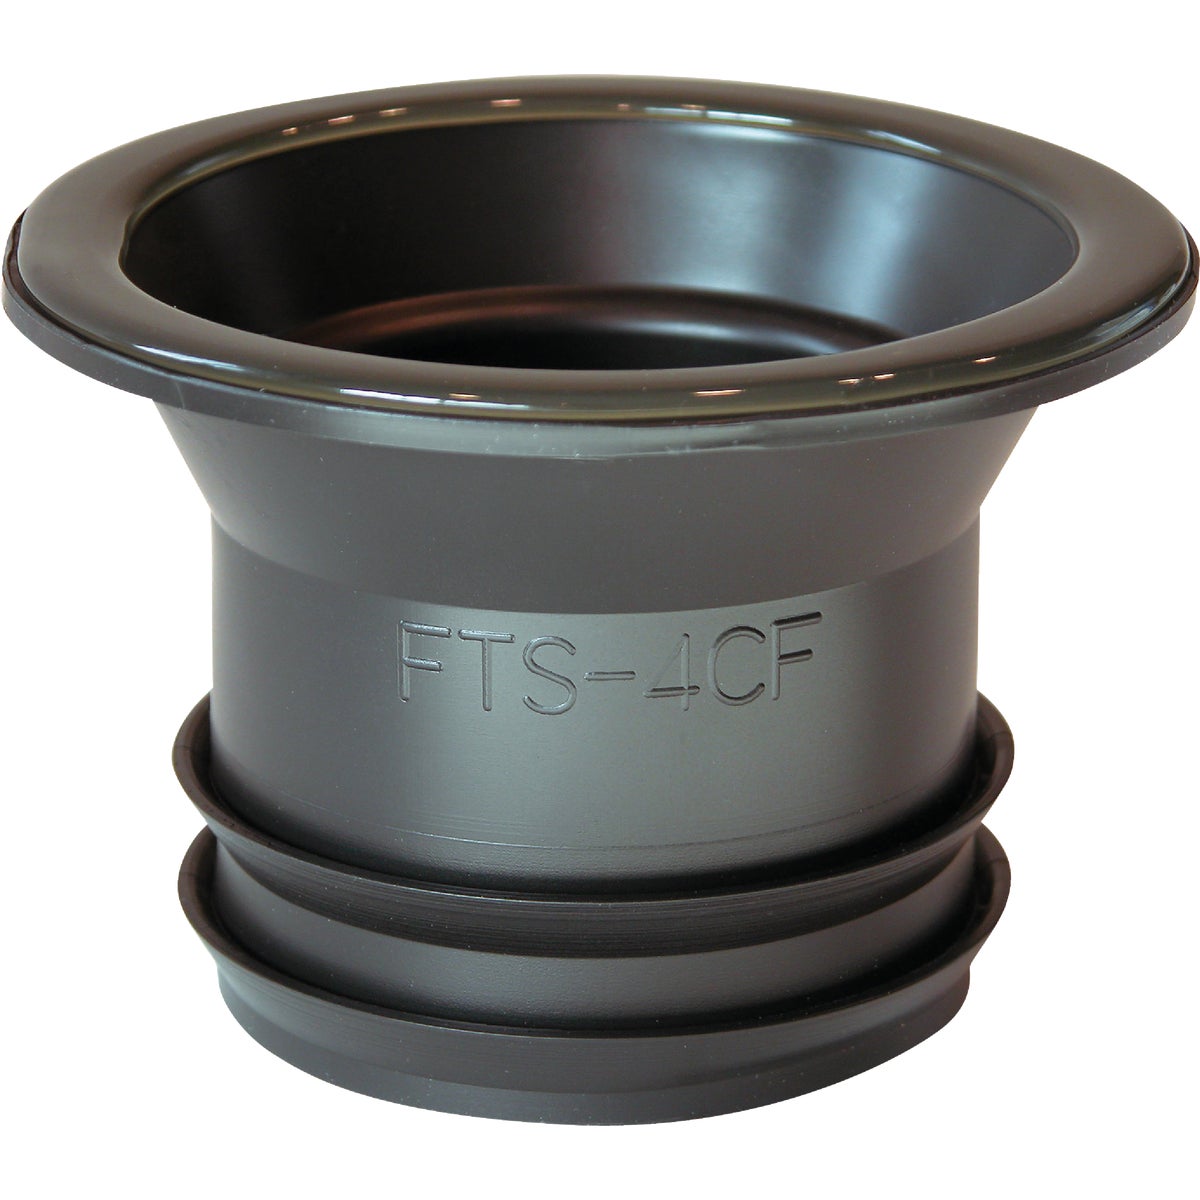 Item 446696, Wax-free toilet seal for a slab flange that is inside a 4" drain pipe.